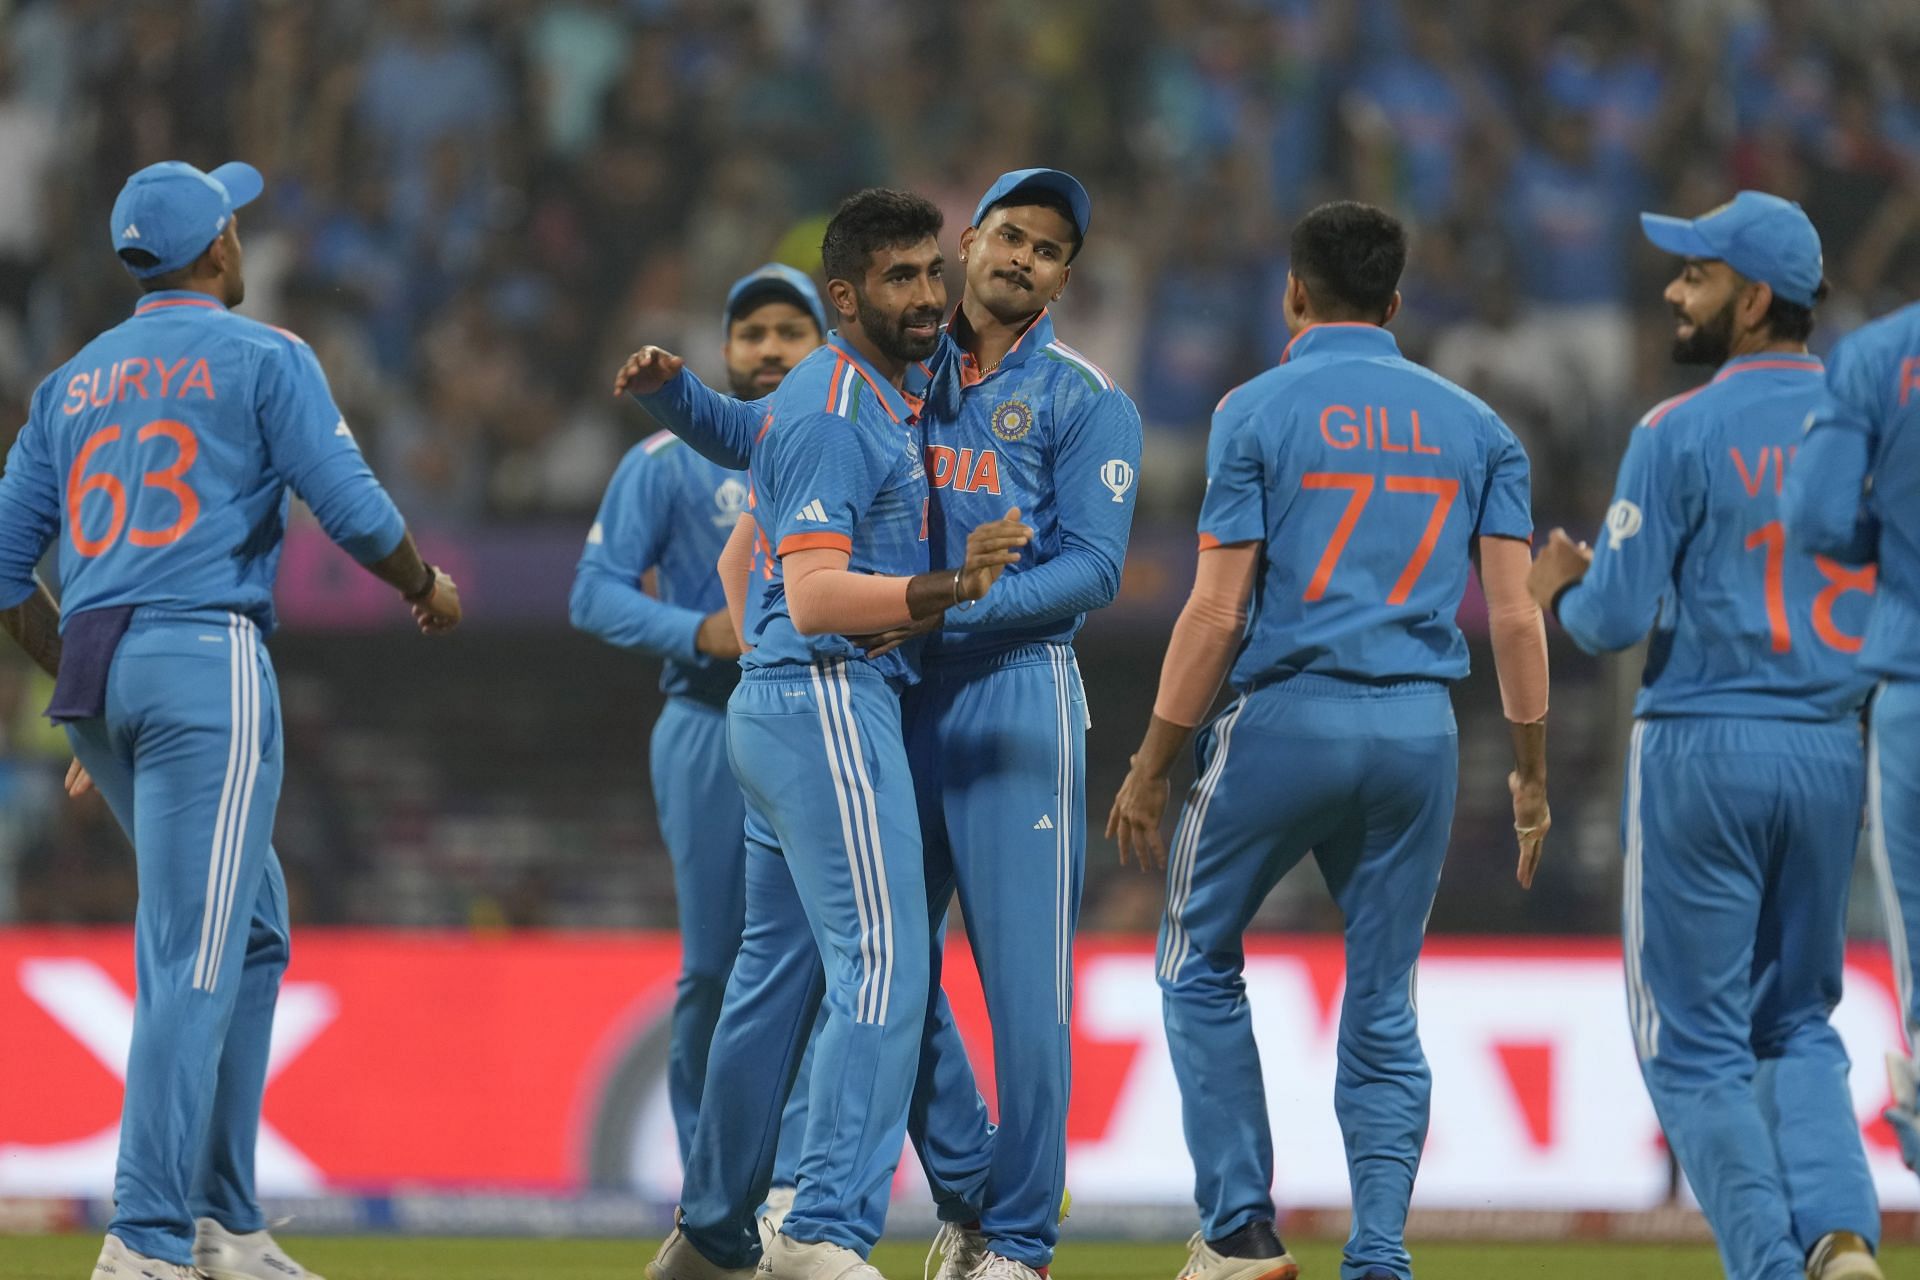 India have an all-win record in the tournament thus far. [P/C: AP]